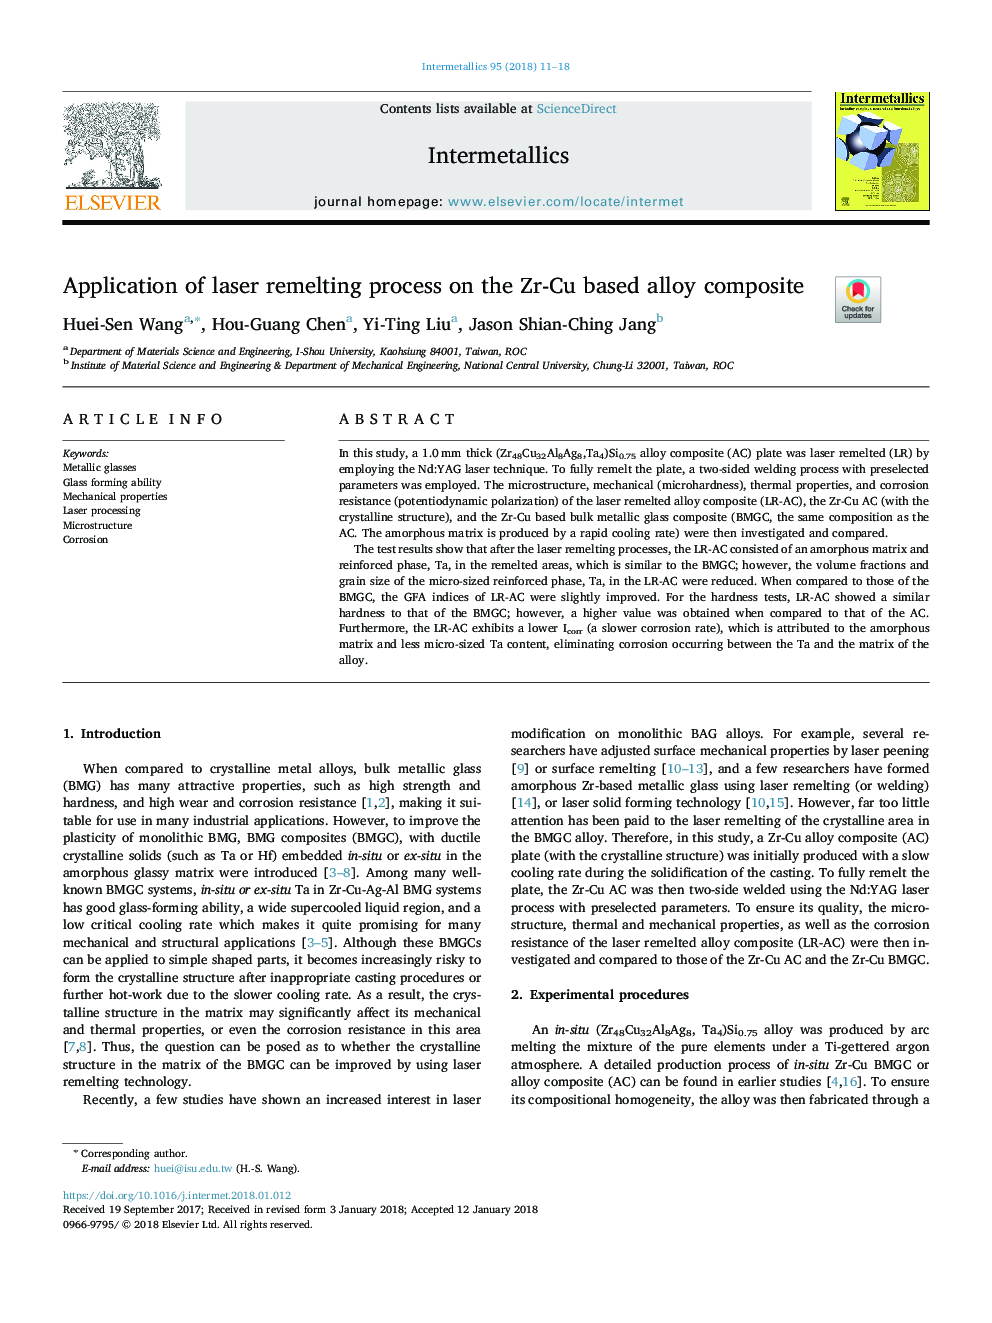 Application of laser remelting process on the Zr-Cu based alloy composite